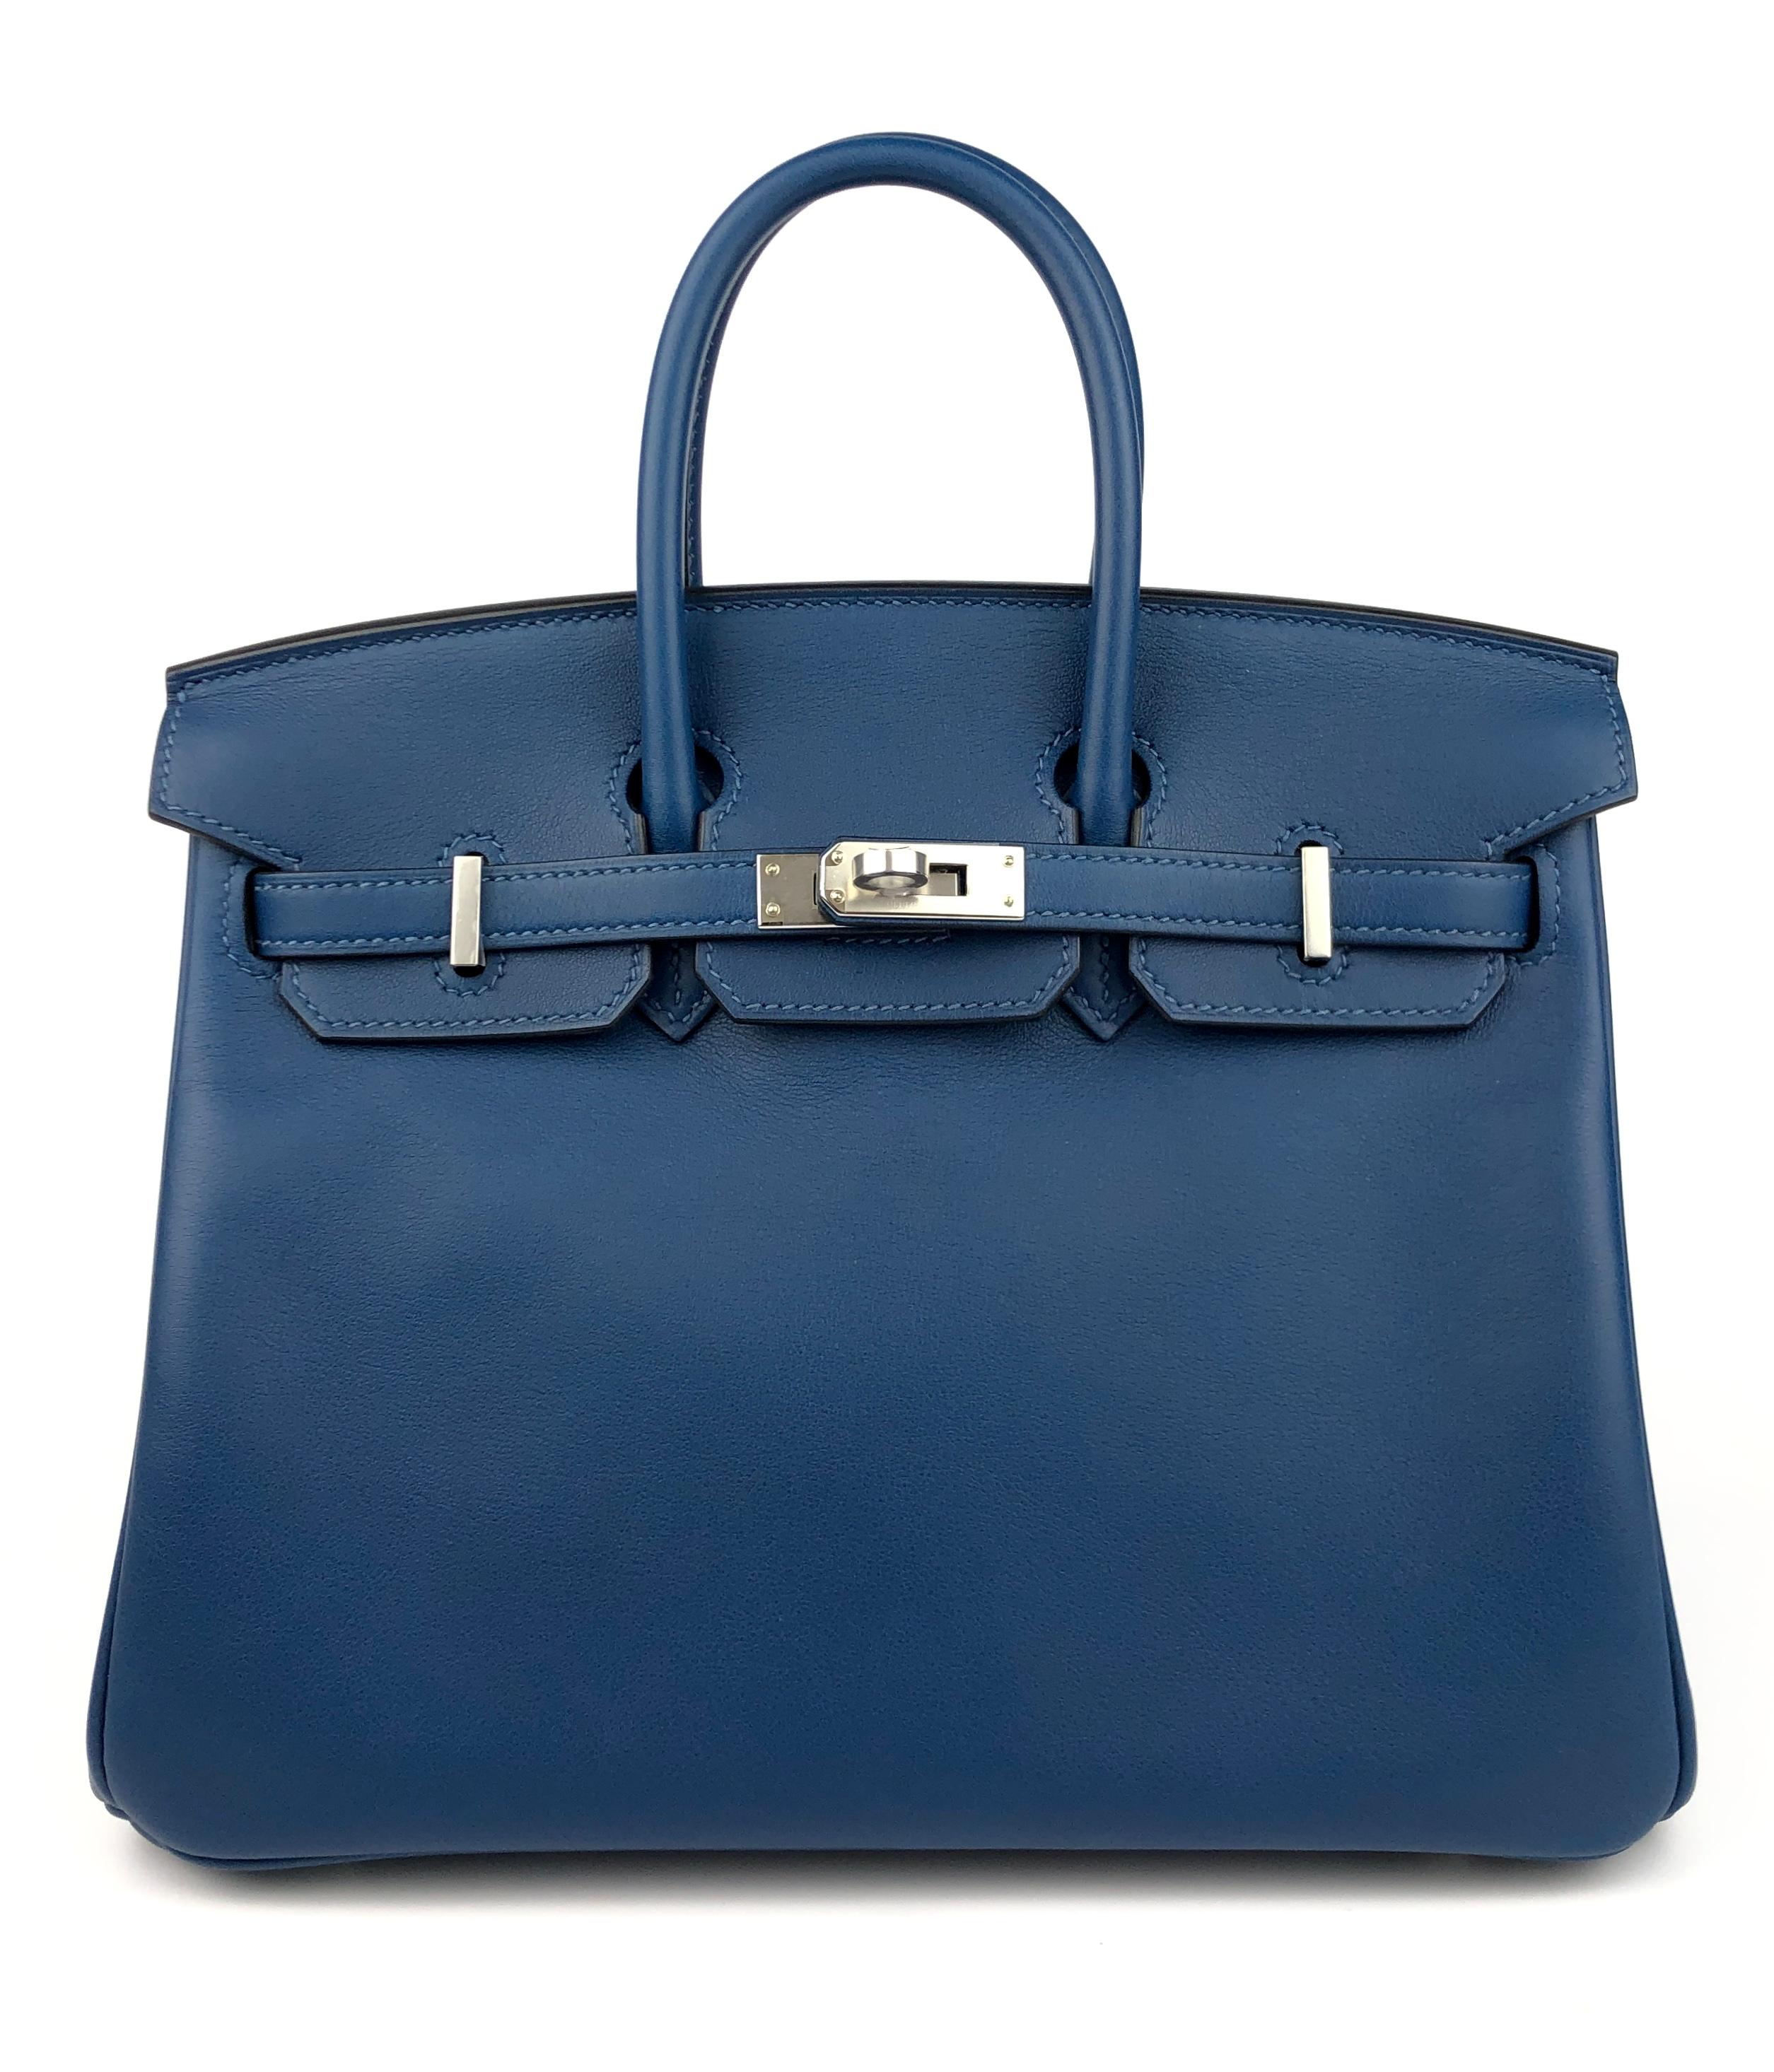 Rare As New 2020 Hermes Birkin 25 Deep Blue Leather complimented by Palladium Hardware. Y Stamp 2020. As New Plastic on all Hardware and feet. Small very minor spot on inside of bag as seen in the photos from storing clochette and raincoat inside.